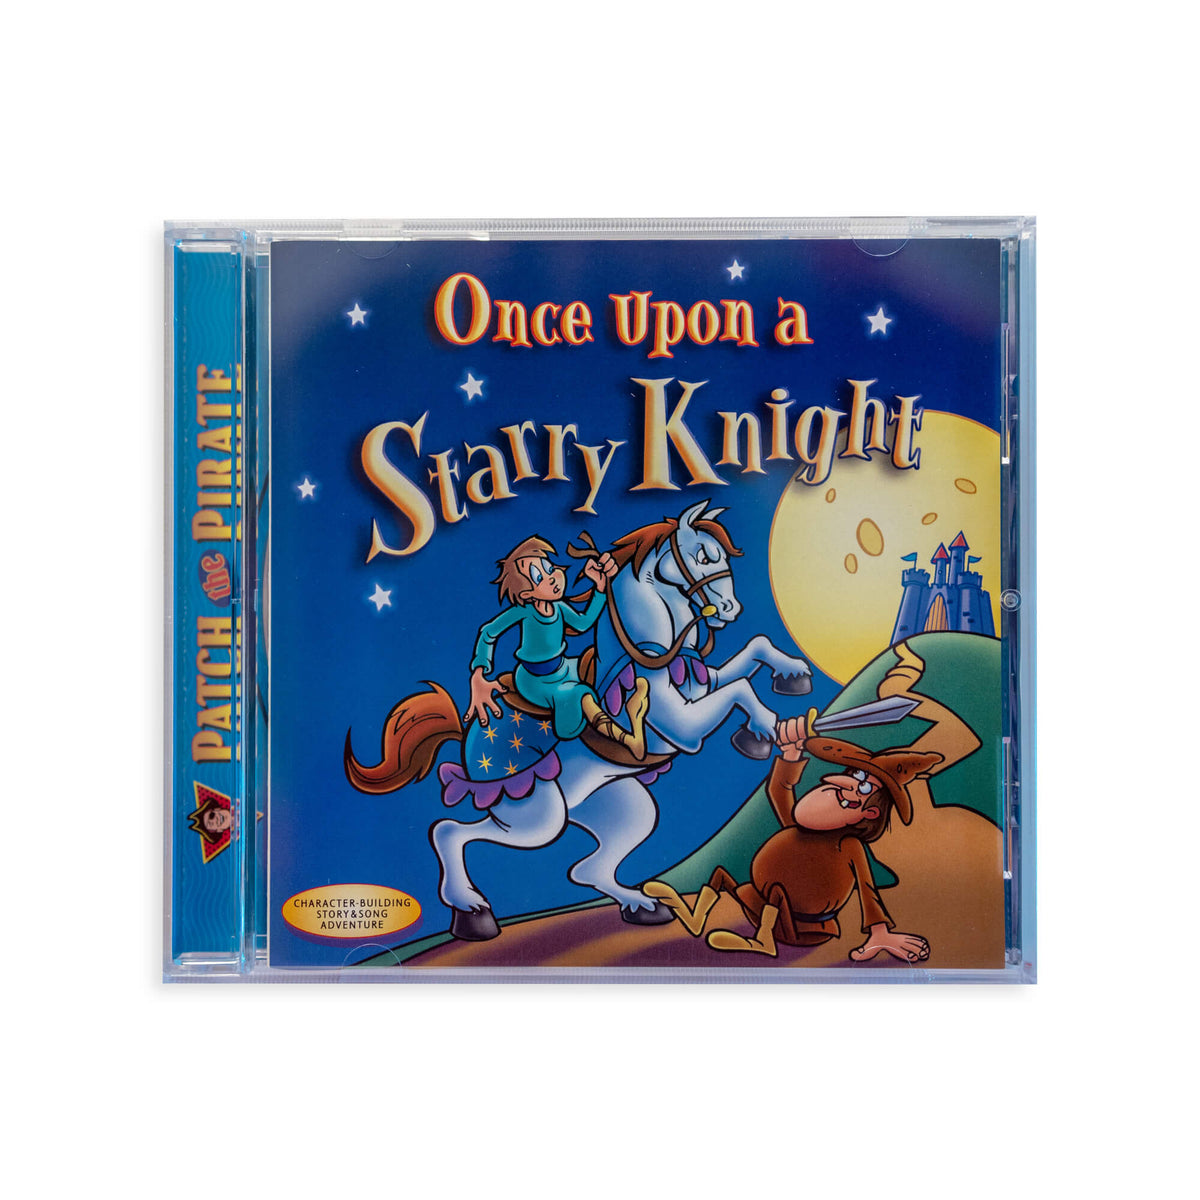 Once Upon a Starry Knight Audio Drama CD